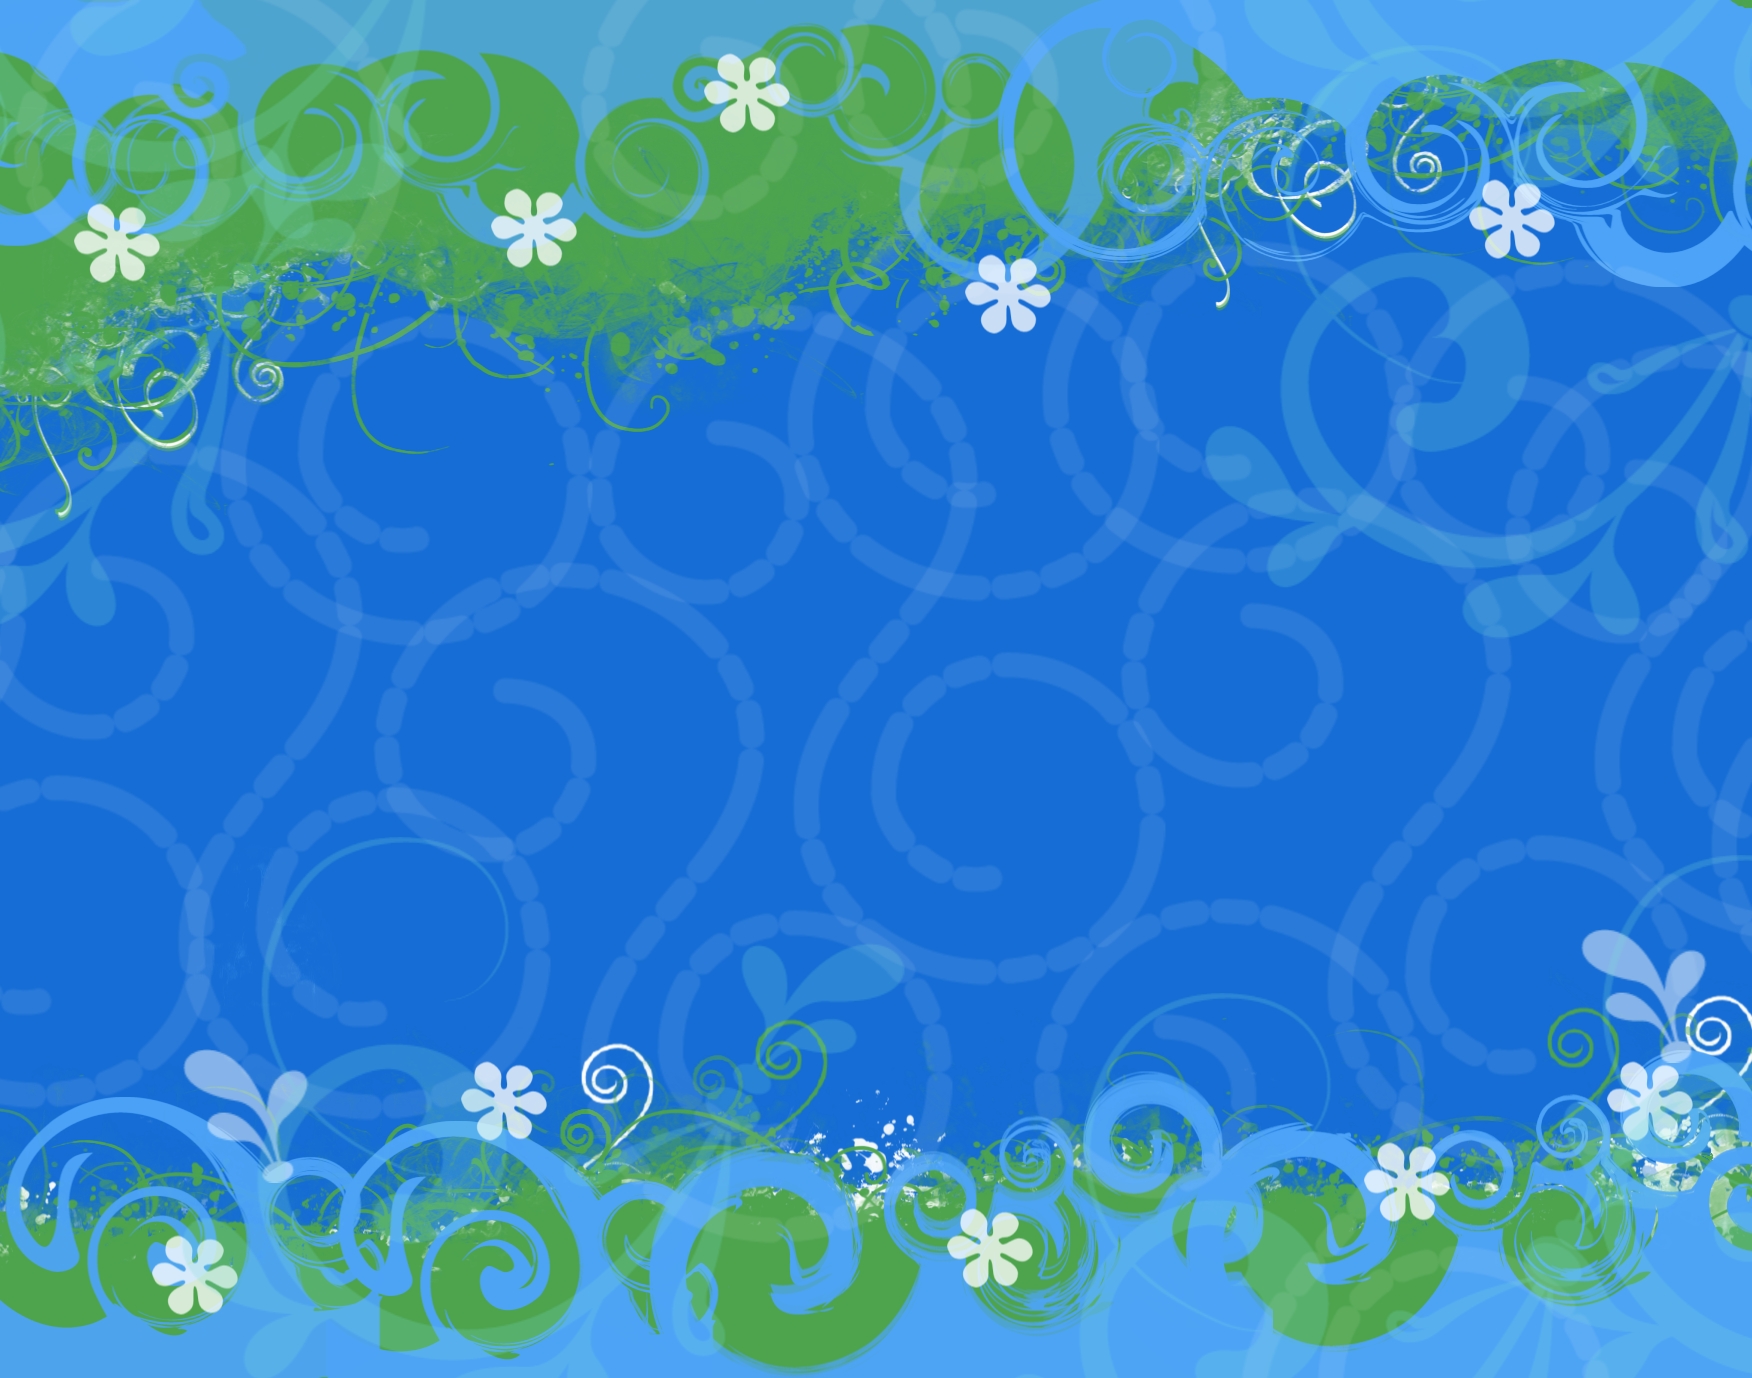 Happy Day Flower Waves Backgrounds powerpoint backgrounds